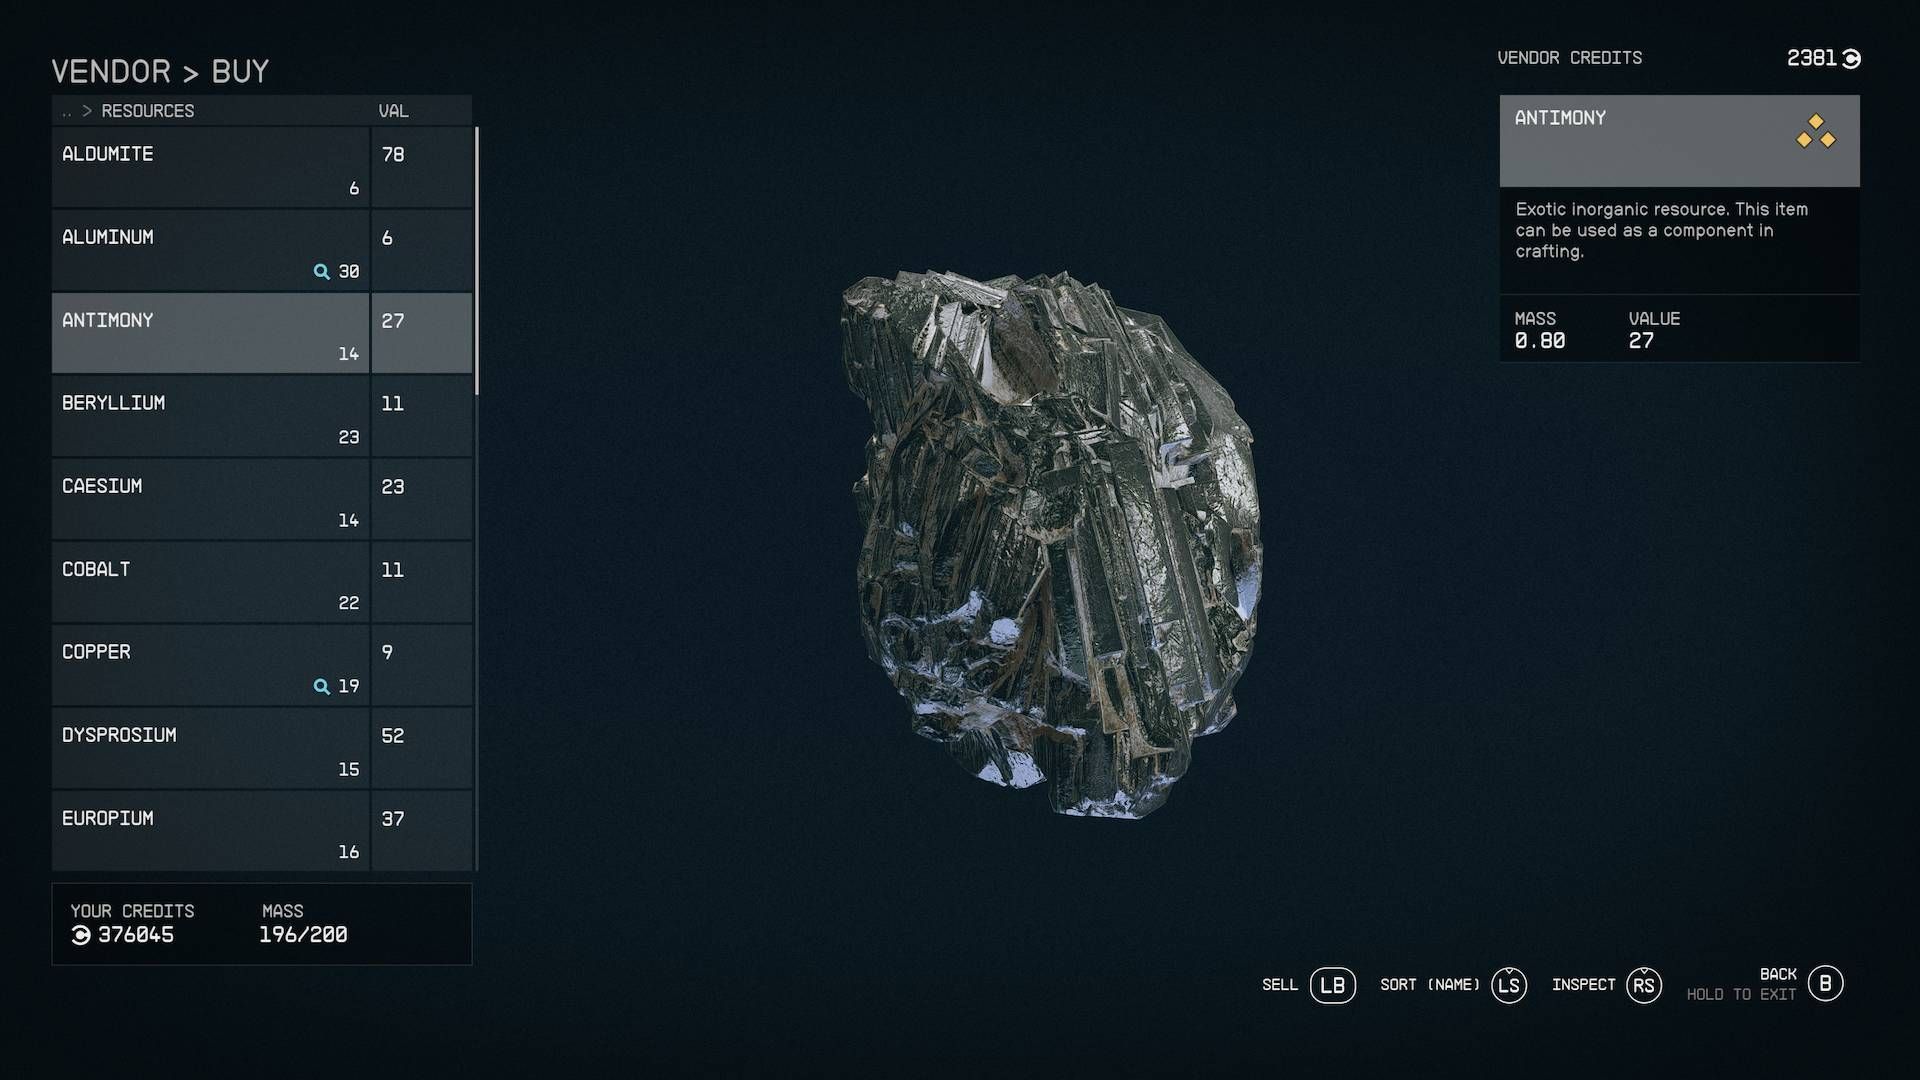 The vendor screen for purchasing Antimony, an exotic resource.